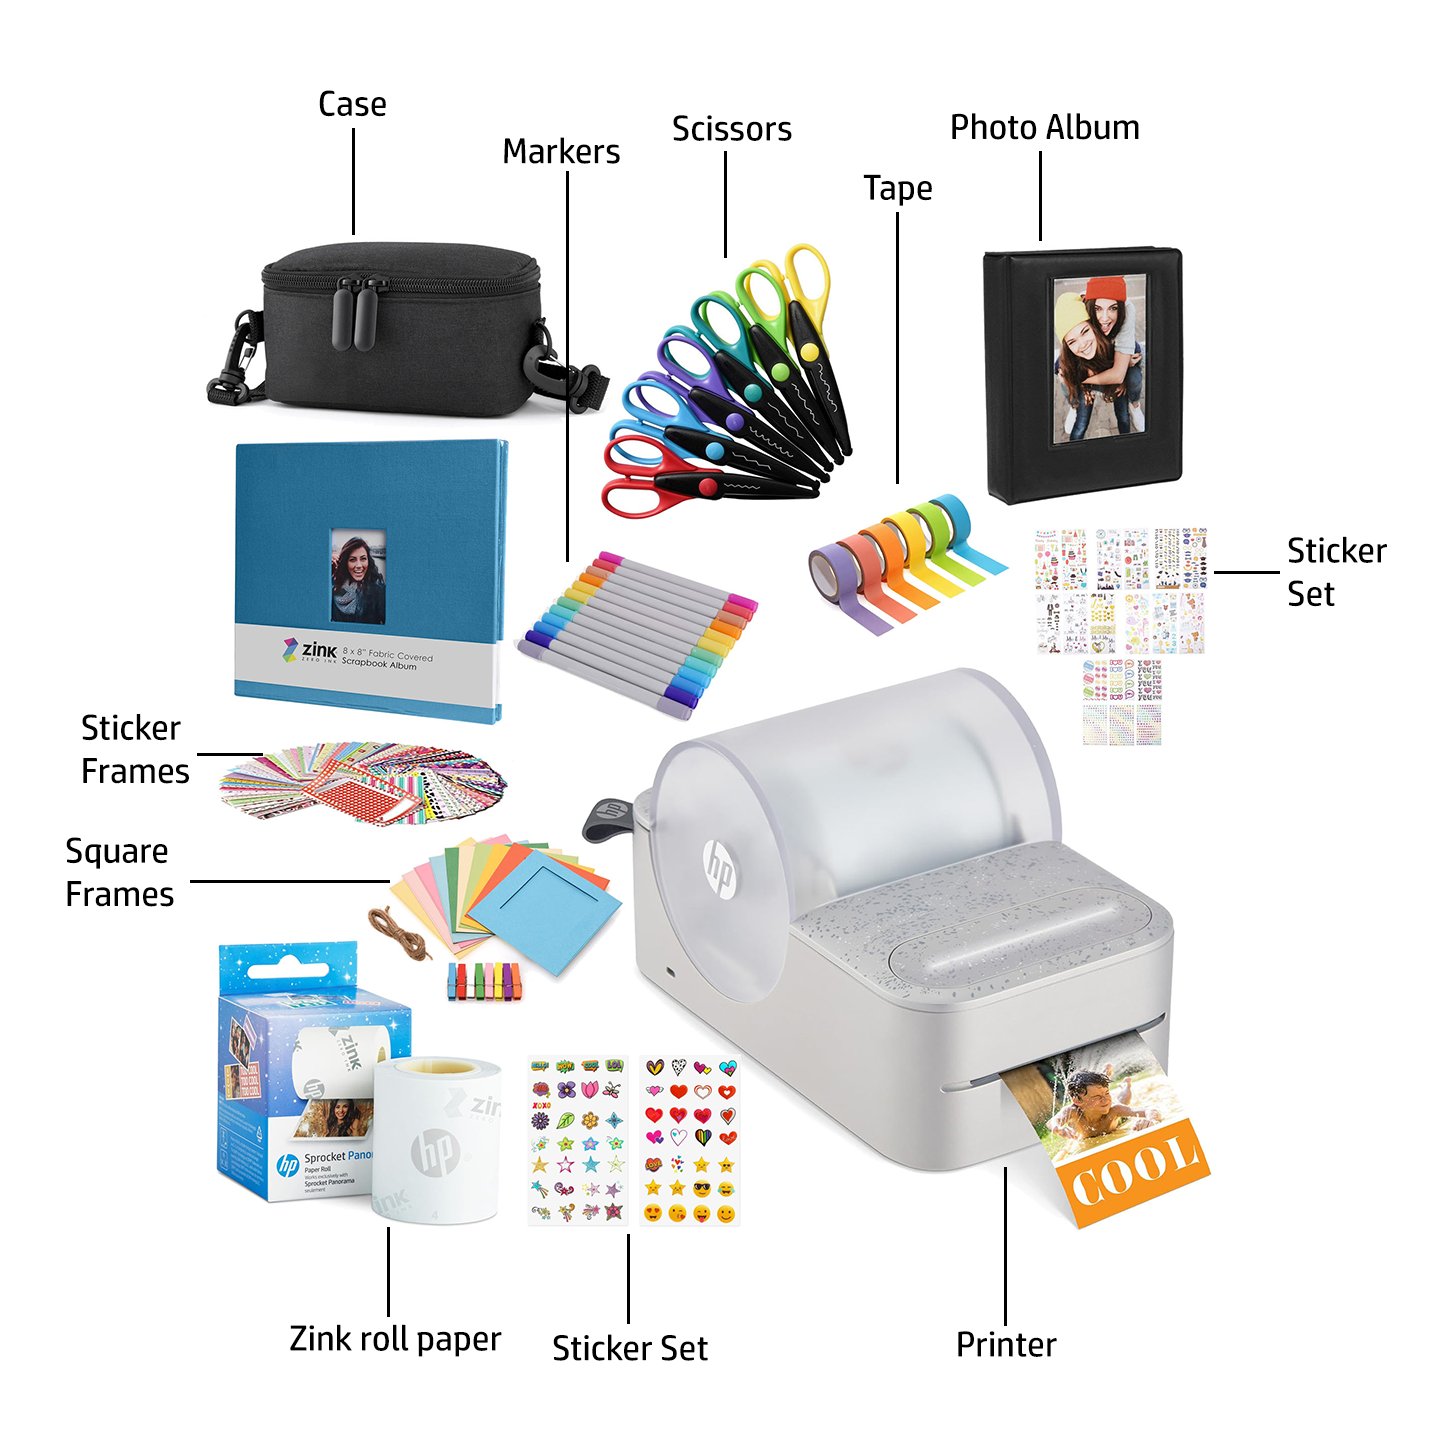 HP Sprocket Panorama Instant Portable Color Label & Photo Printer (Grey) Craft Bundle with case, HP Zink roll, photo album, markers, scissors, tape, stickers and frames Sprocket Printers CA